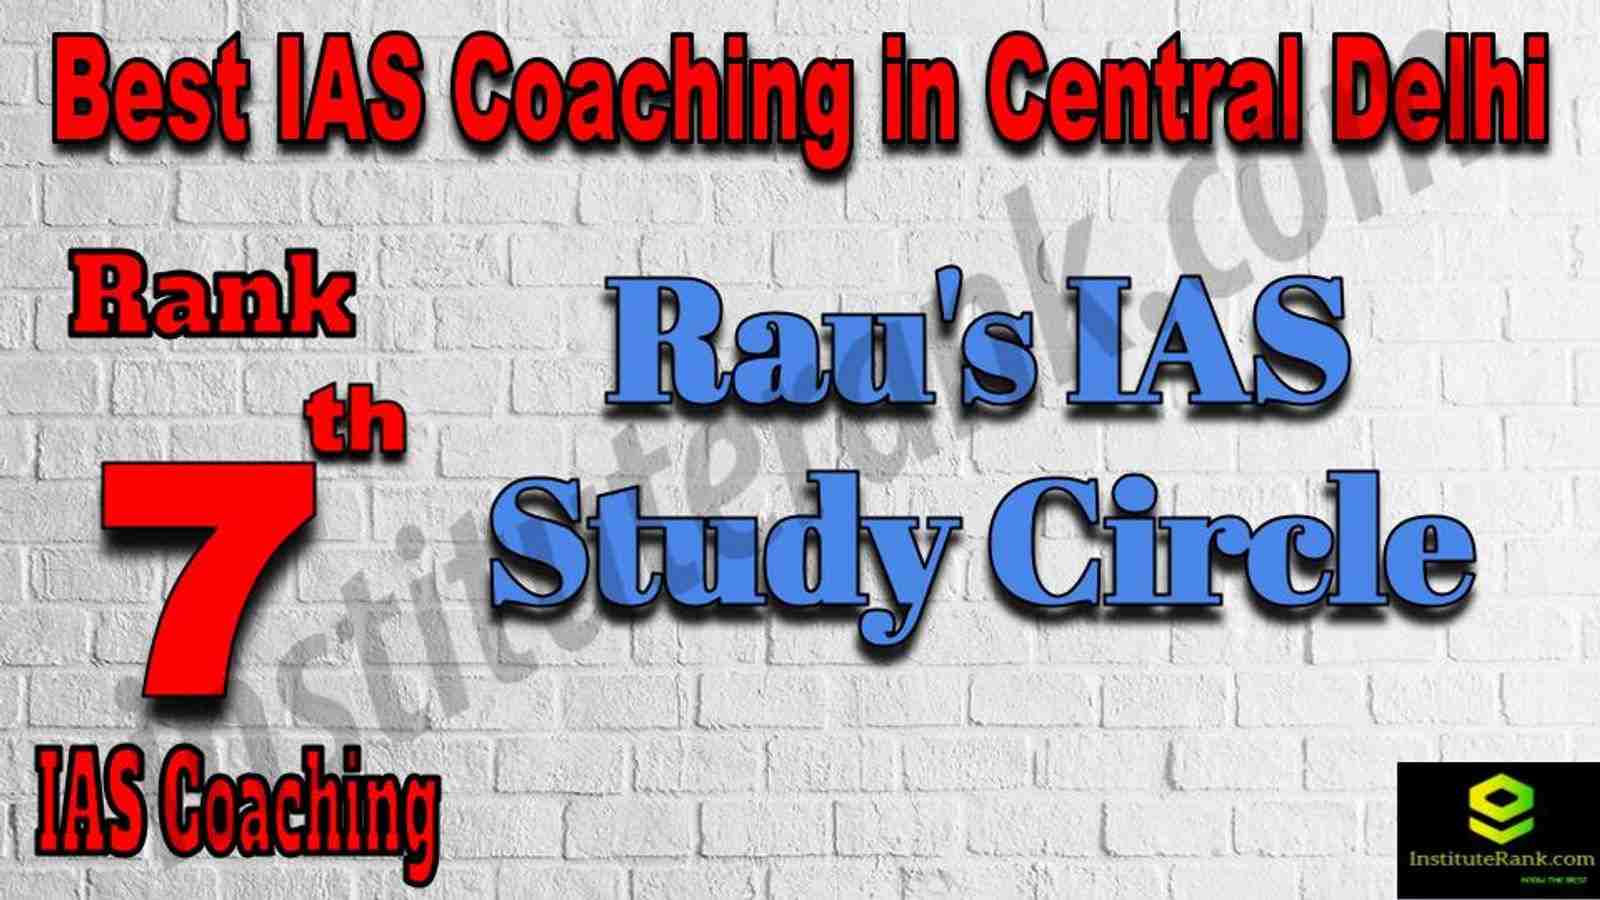 7th Best IAS Coaching in Central Delhi